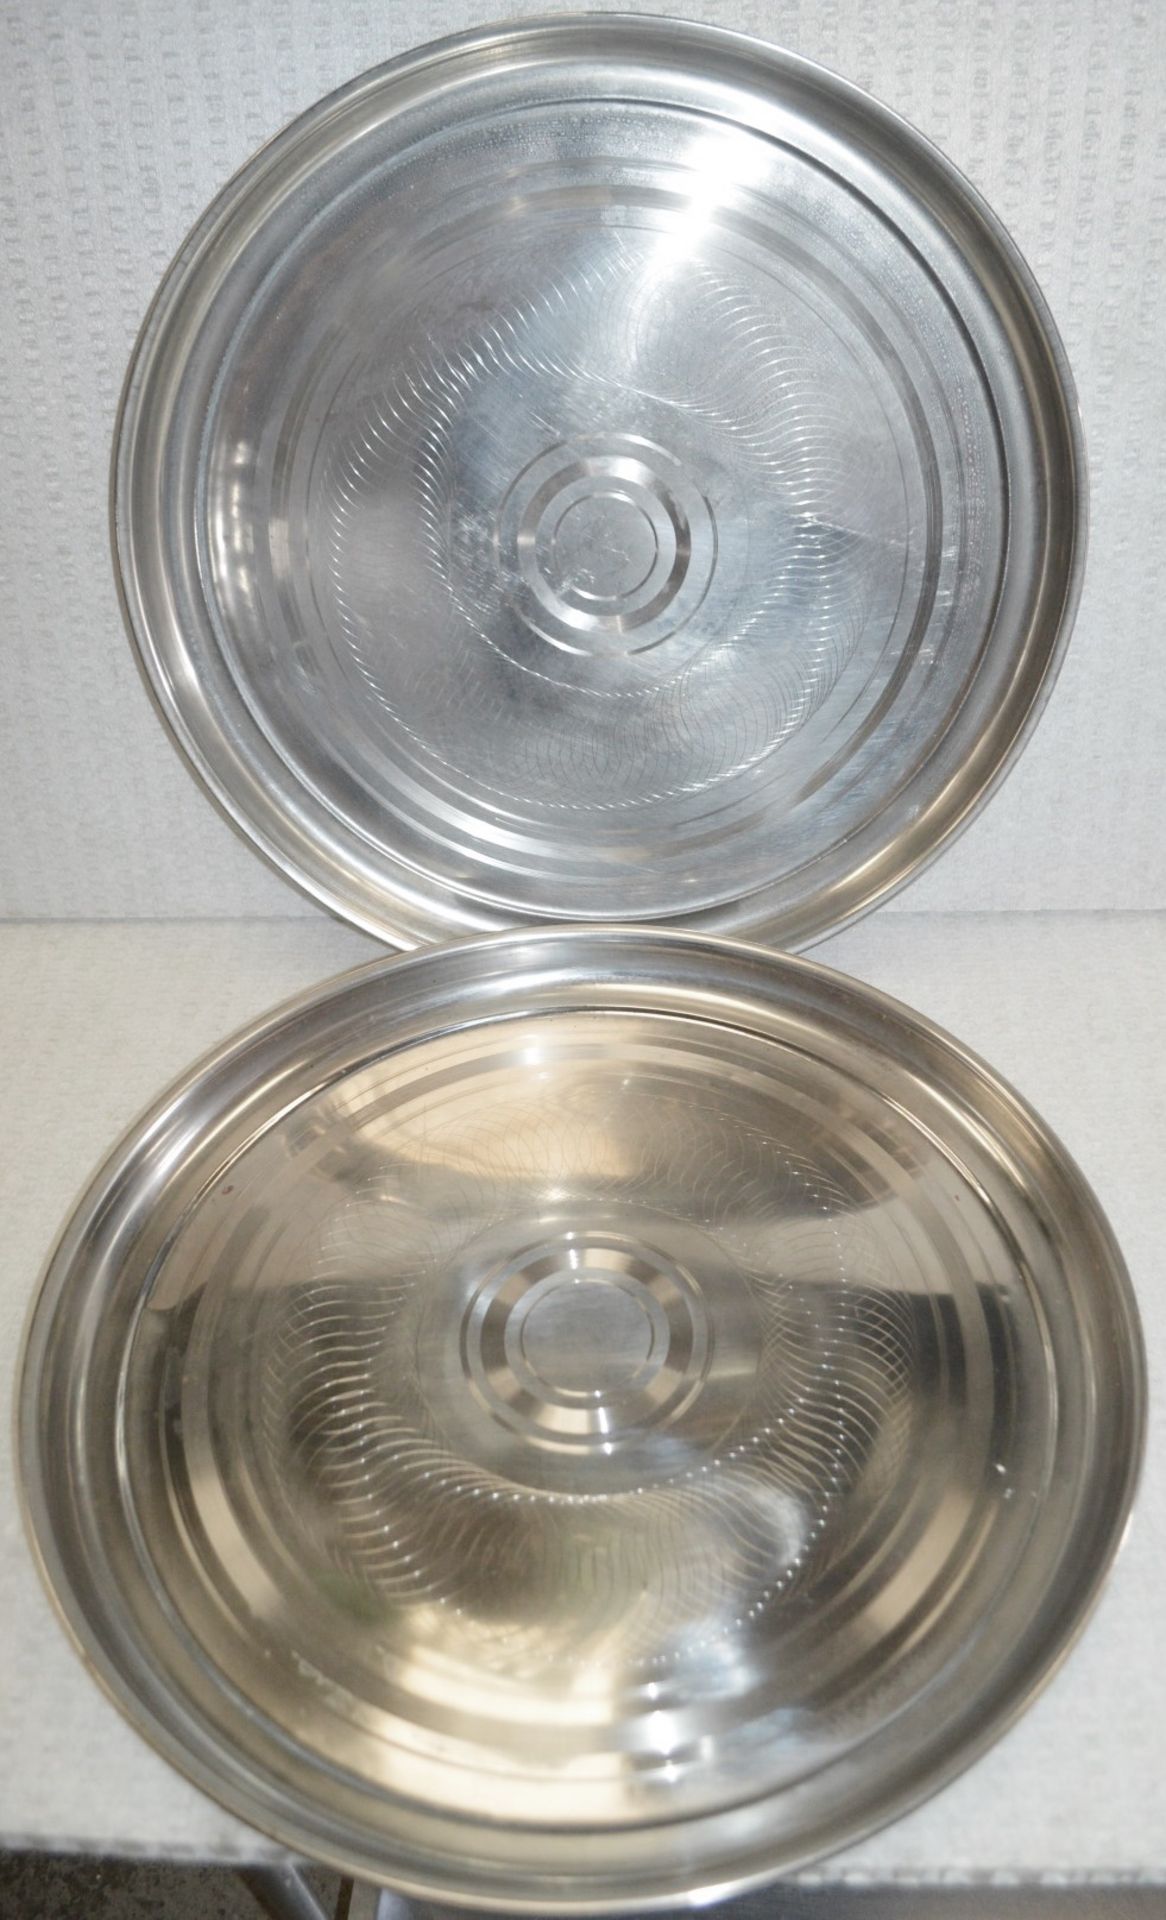 3 x Large Silver Stainless Steel Silver Serving Trays - Dimensions: L45 x W45 cm - Recently - Image 3 of 3